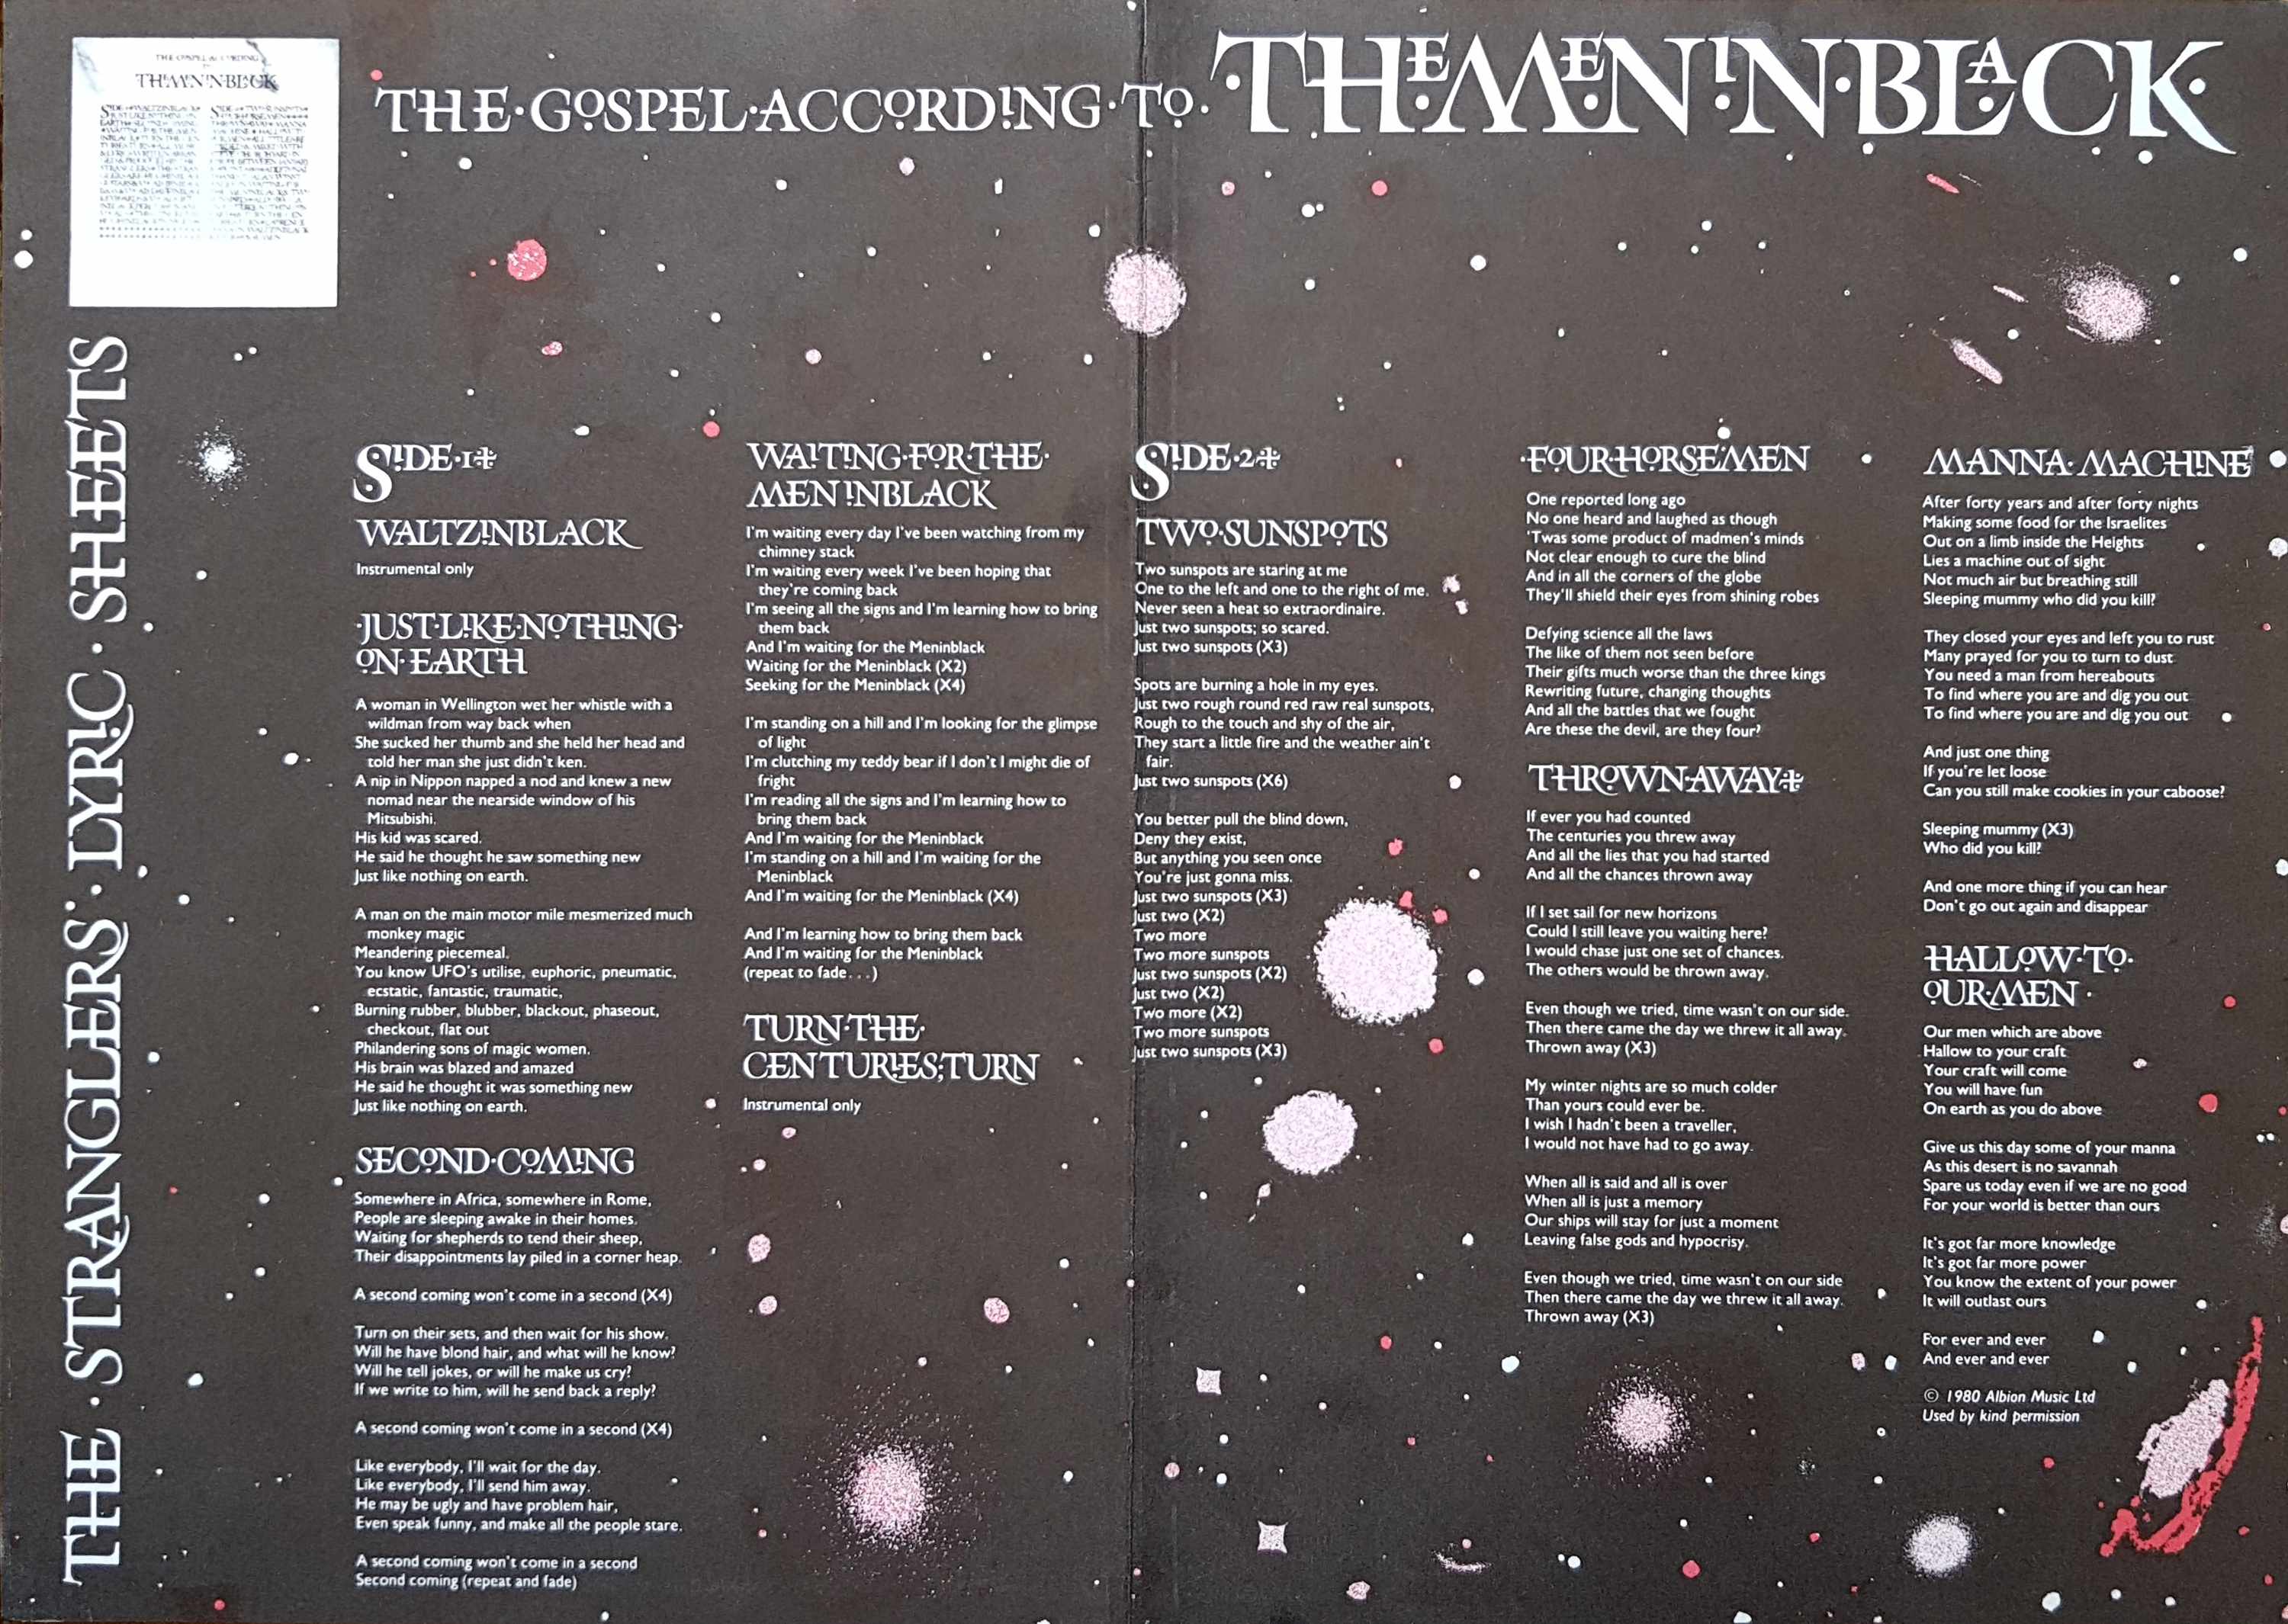 Picture of The gospel according to themeninblack lyric sheets by artist The Stranglers  from The Stranglers books